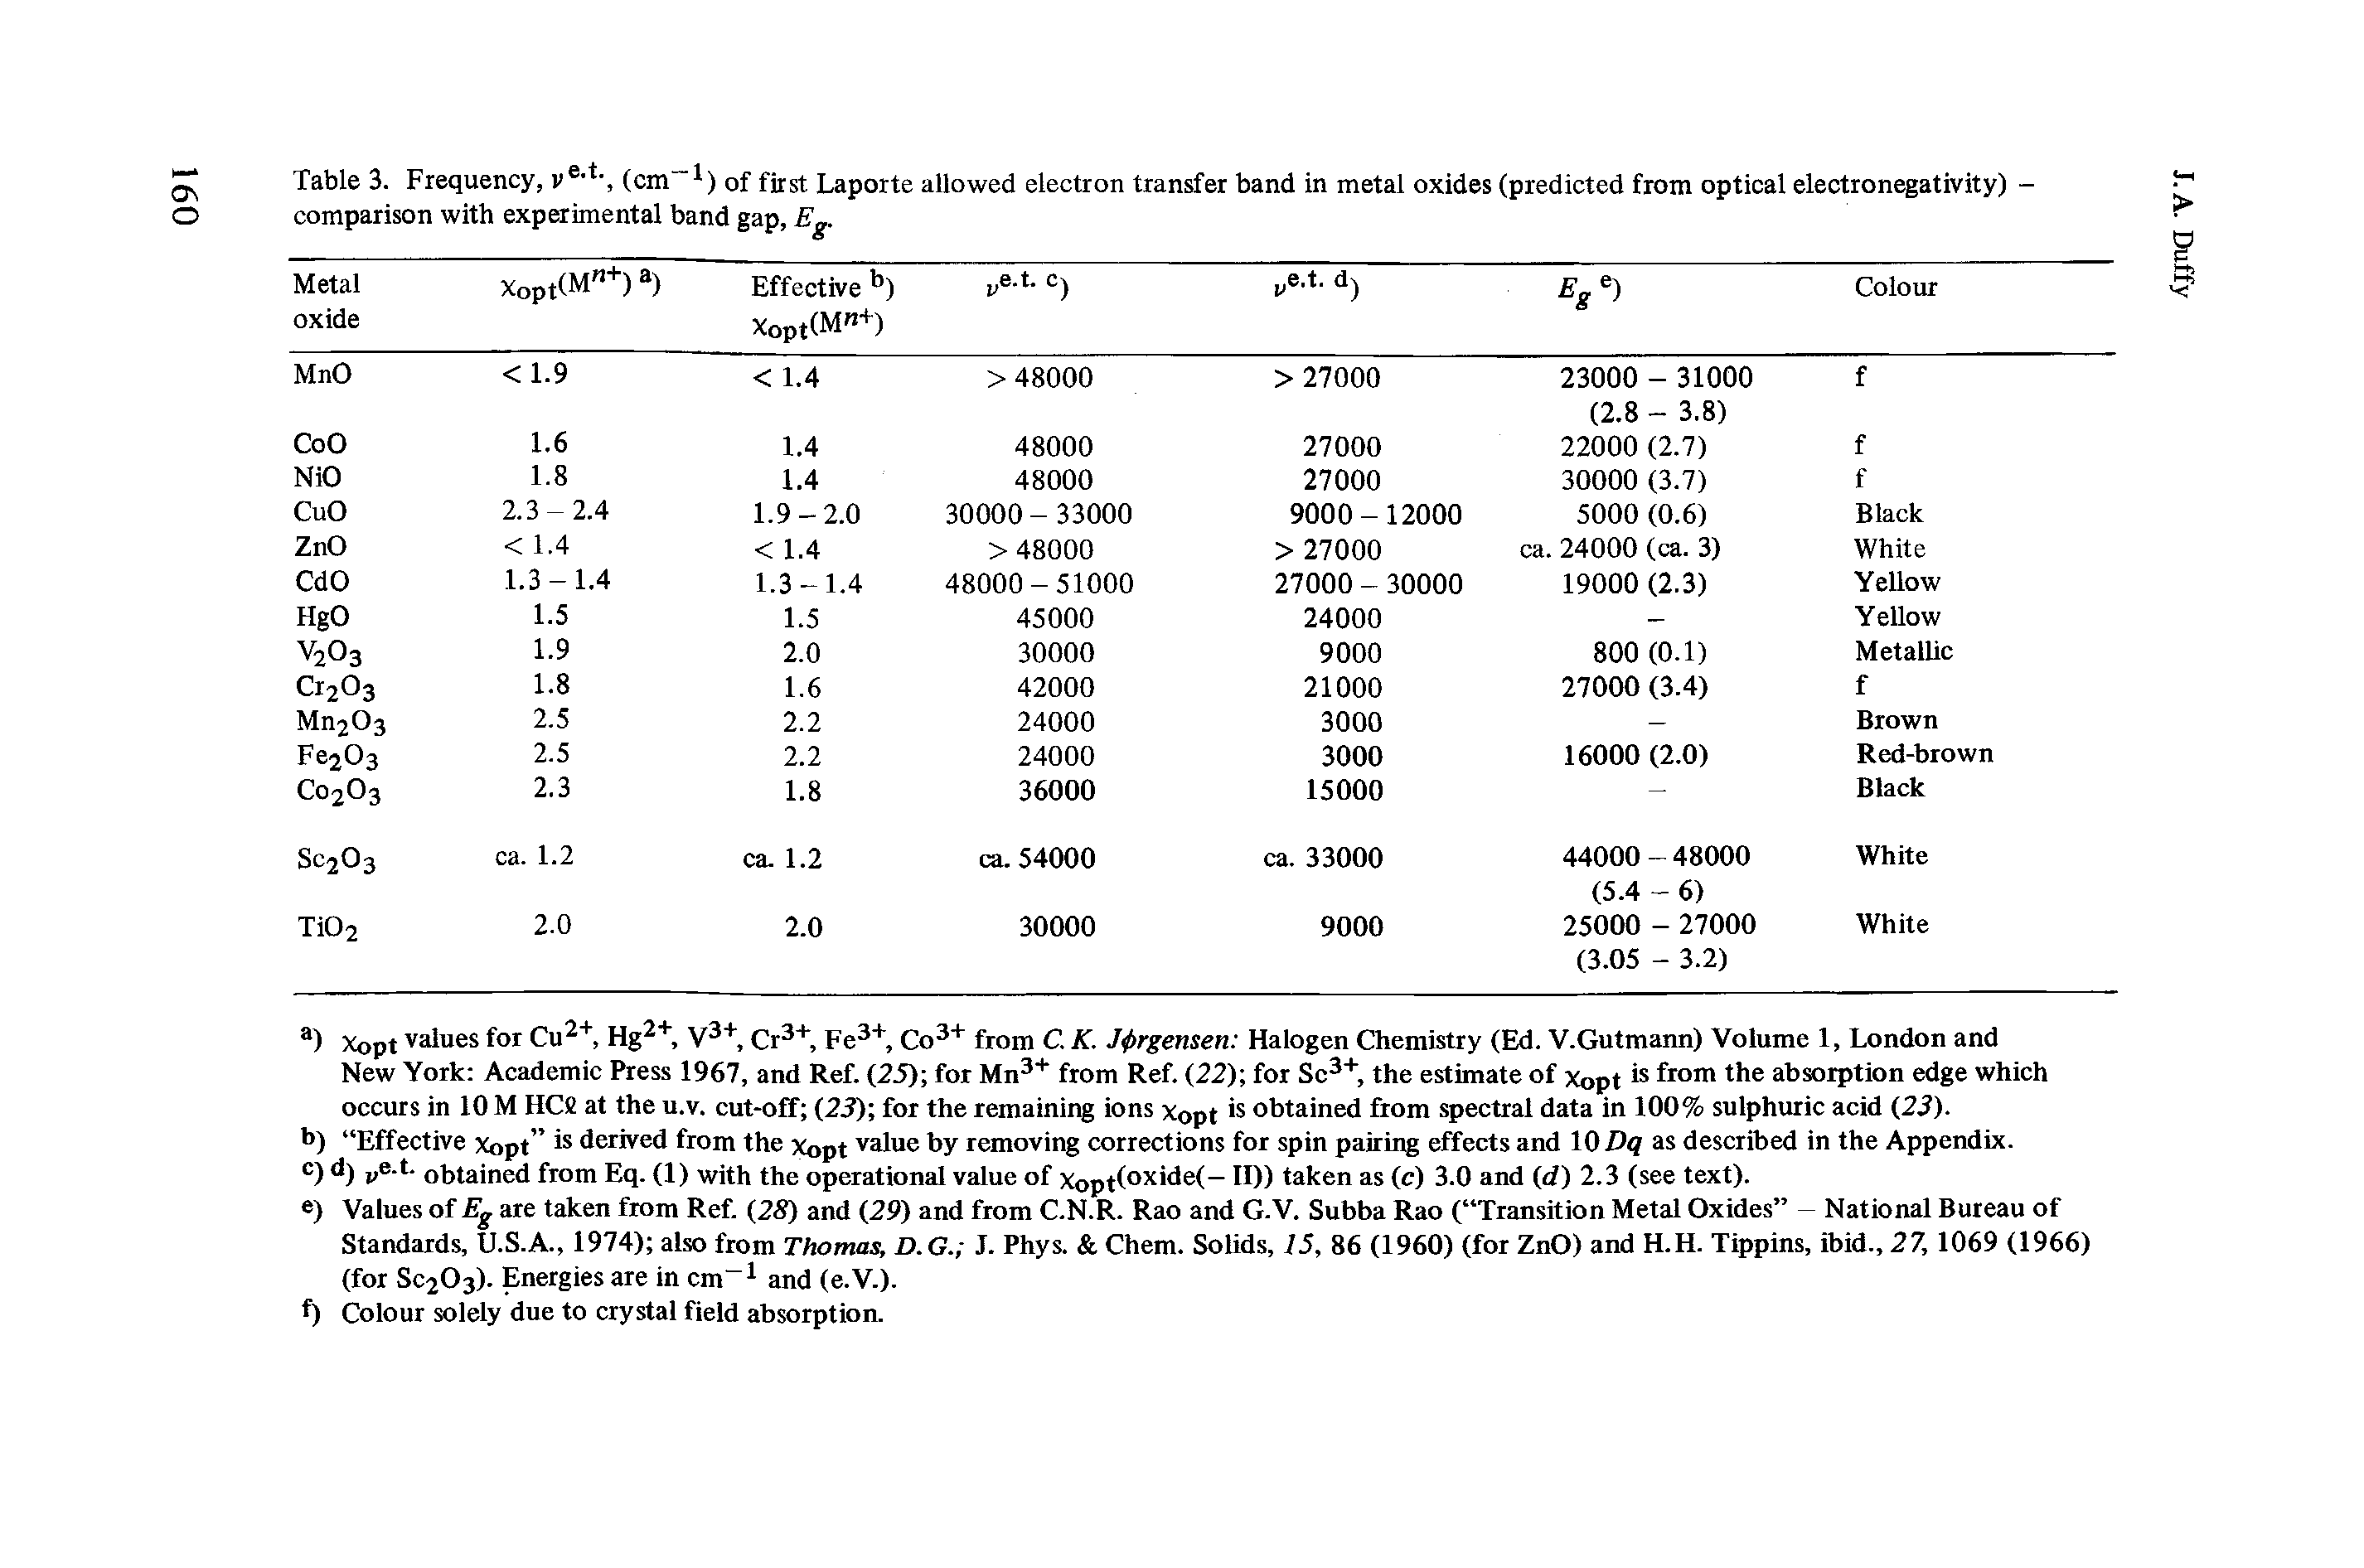 Table 3. Frequency, v - -, (cm 1) of first Laporte allowed electron transfer band in metal oxides (predicted from optical electronegativity) comparison with experimental band gap, Eg.